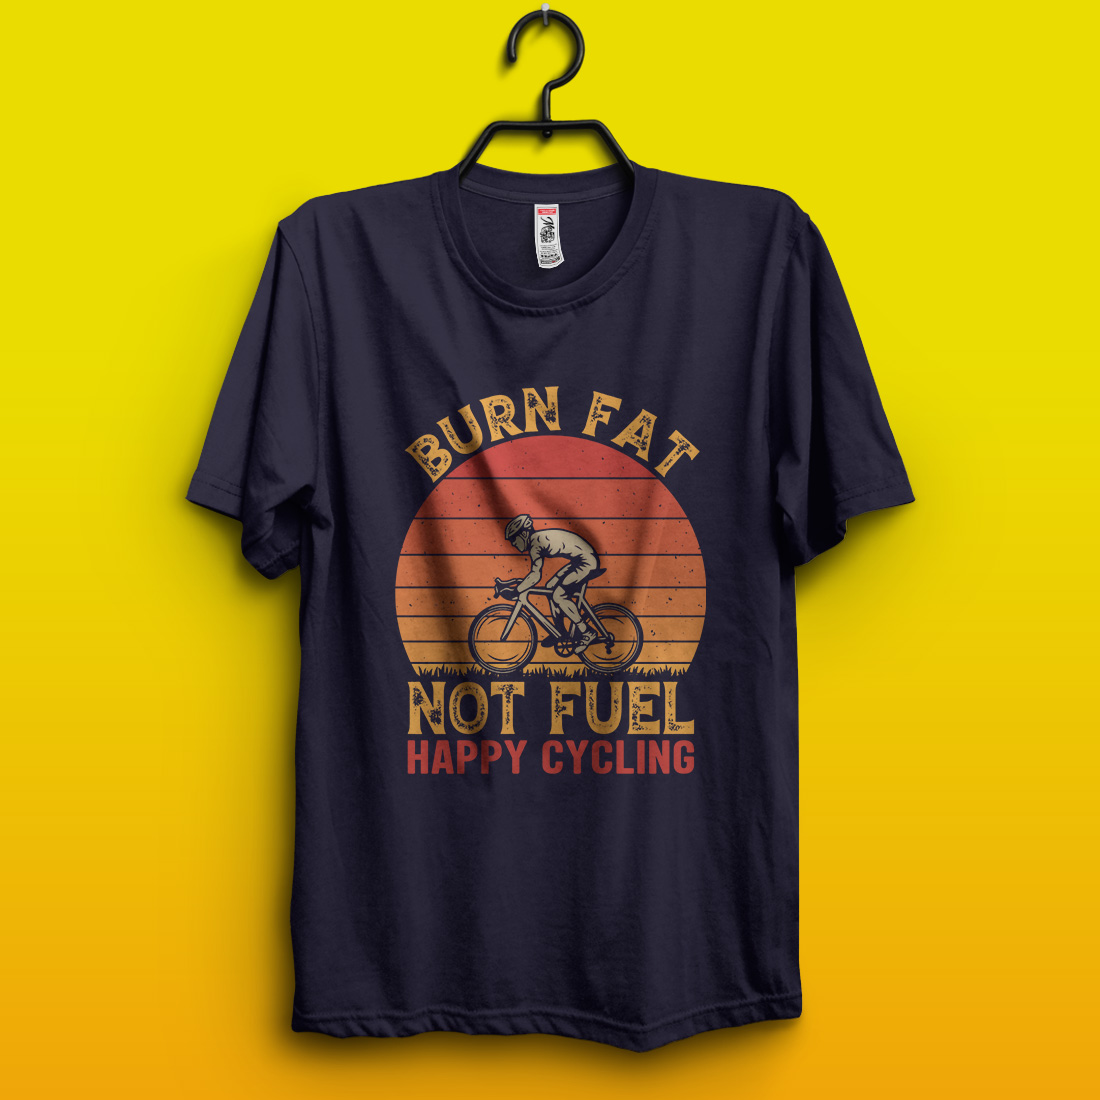 Burn fat not fuel Happy cycling – Cycling quotes t-shirt design for adventure lovers preview image.